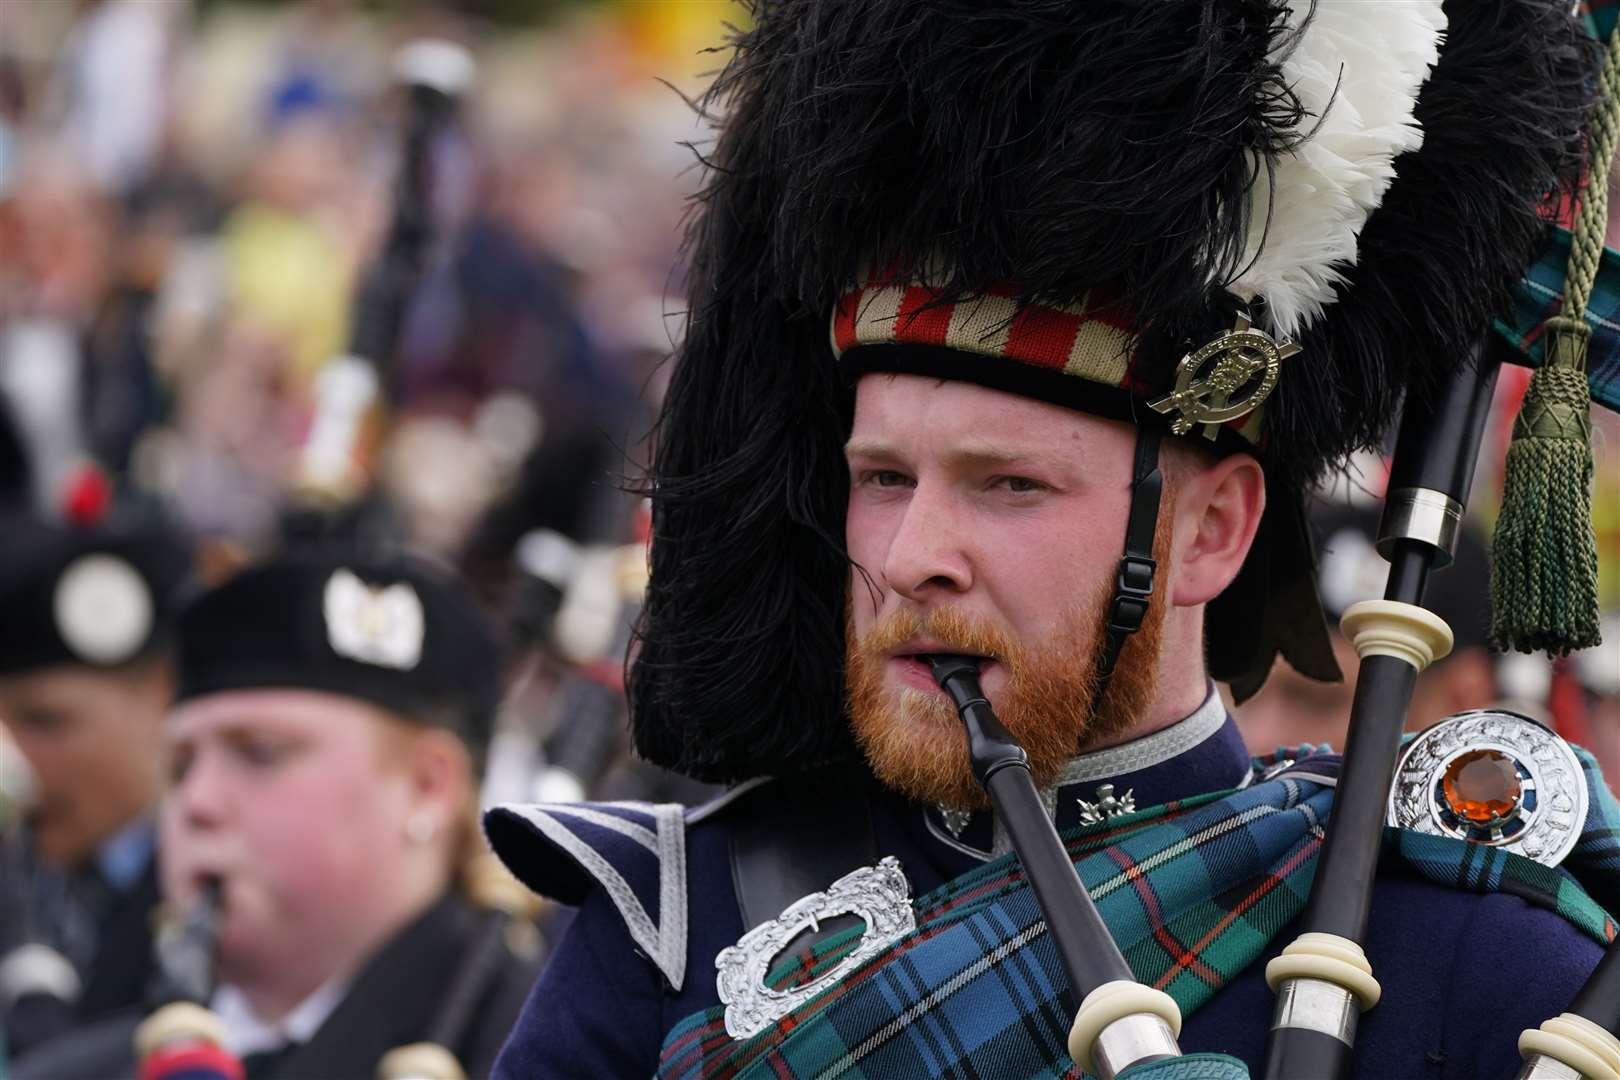 The Braemar Gathering highland games are held a short distance from the royals’ summer retreat at the Balmoral estate in Aberdeenshire (Andrew Milligan/PA)